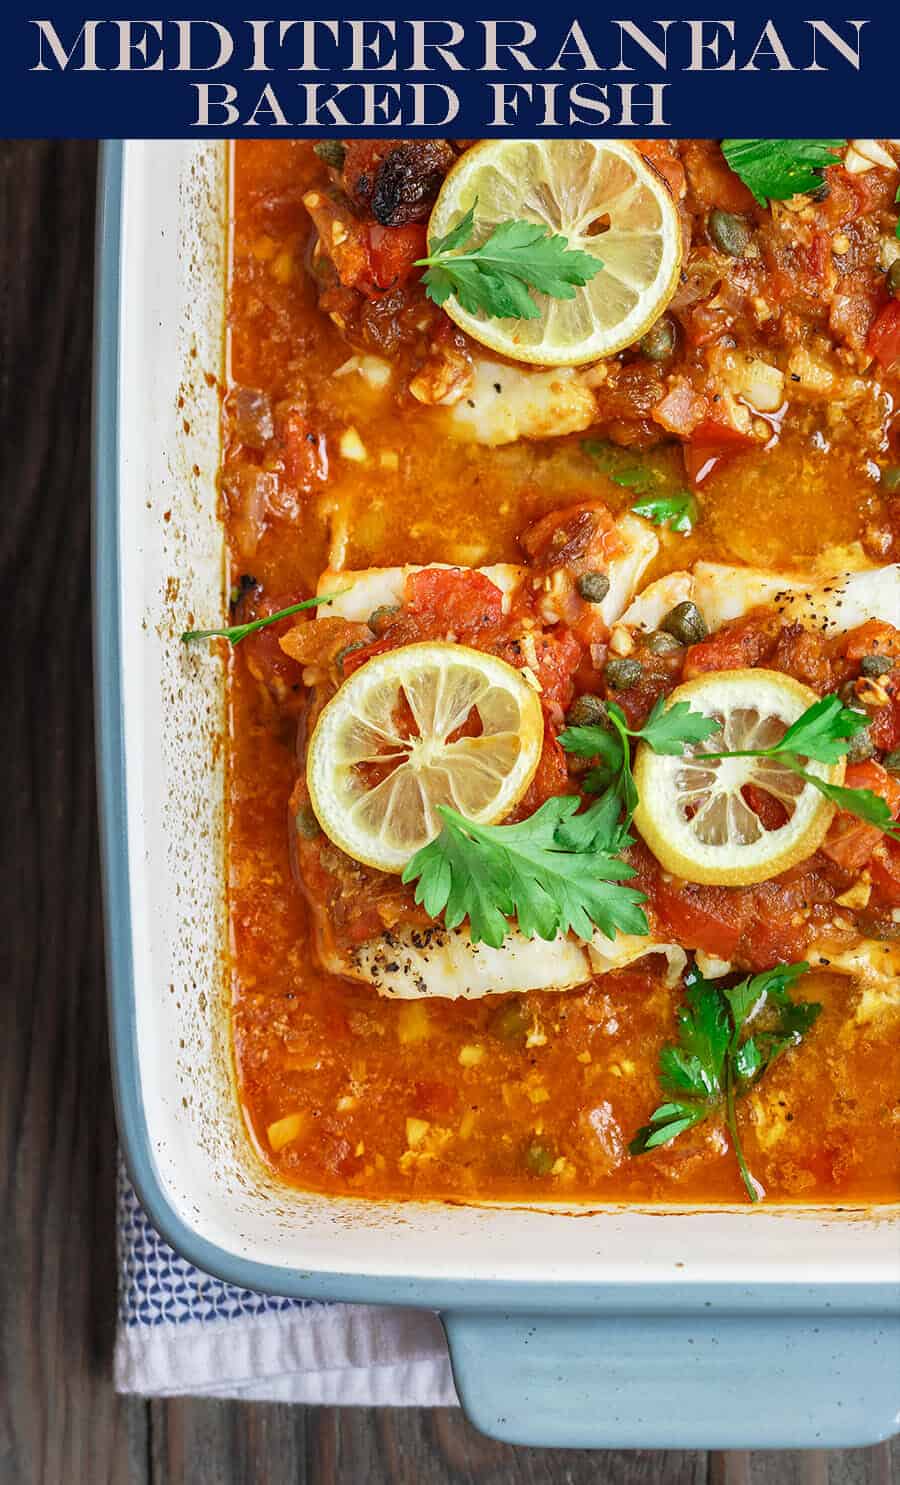 Mediterranean Baked Fish Recipe with Tomatoes and Capers | The Mediterranean Dish. Easy, bright, flavor-packed baked fish, prepared Mediterranean style with spices, tomatoes and capers. From TheMediterraneanDish.com #healthyrecipes #fishrecipe #bakedfish #cod #halibut #glutenfree #seafoodrecipe #seafood #fish #mediterraneandiet #mediterranean #easyrecipe